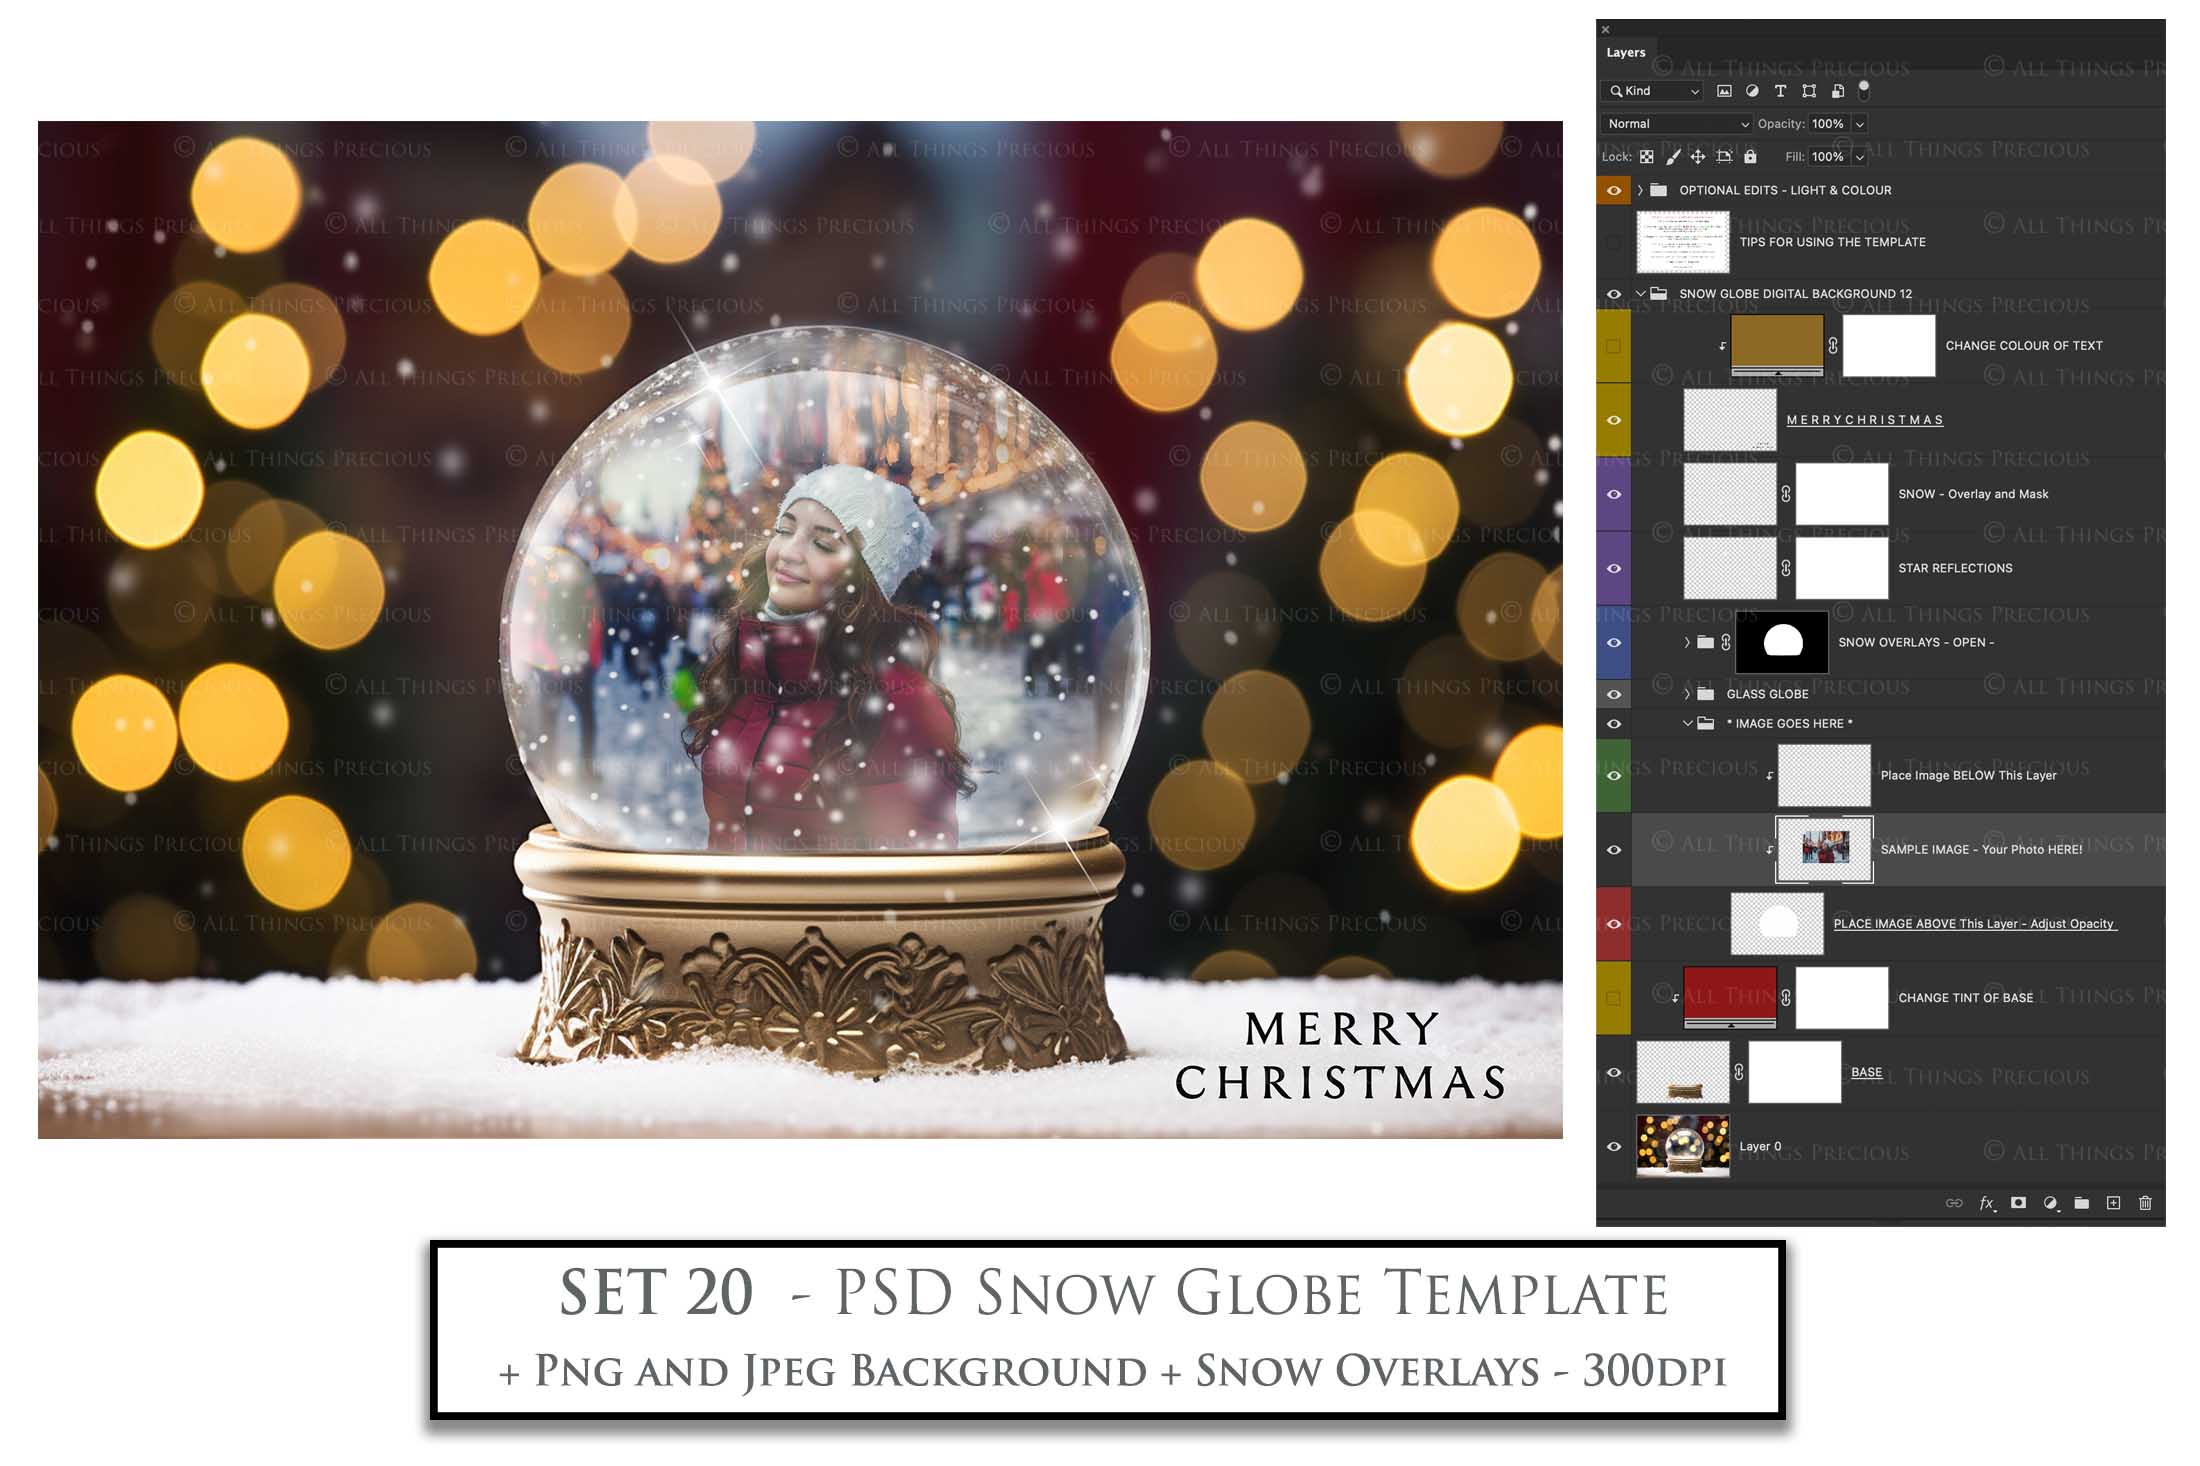 Digital Snow Globe Background, with png snow overlays and PSD Template.set.The globe is transparent, perfect for you to add your own images and retain the snow globe effect.This file is 6000 x 4000, 300dpi. Printable Christmas Theme style. Photoshop Editing Backdrop for Photographers, Scrapbooking and cards.